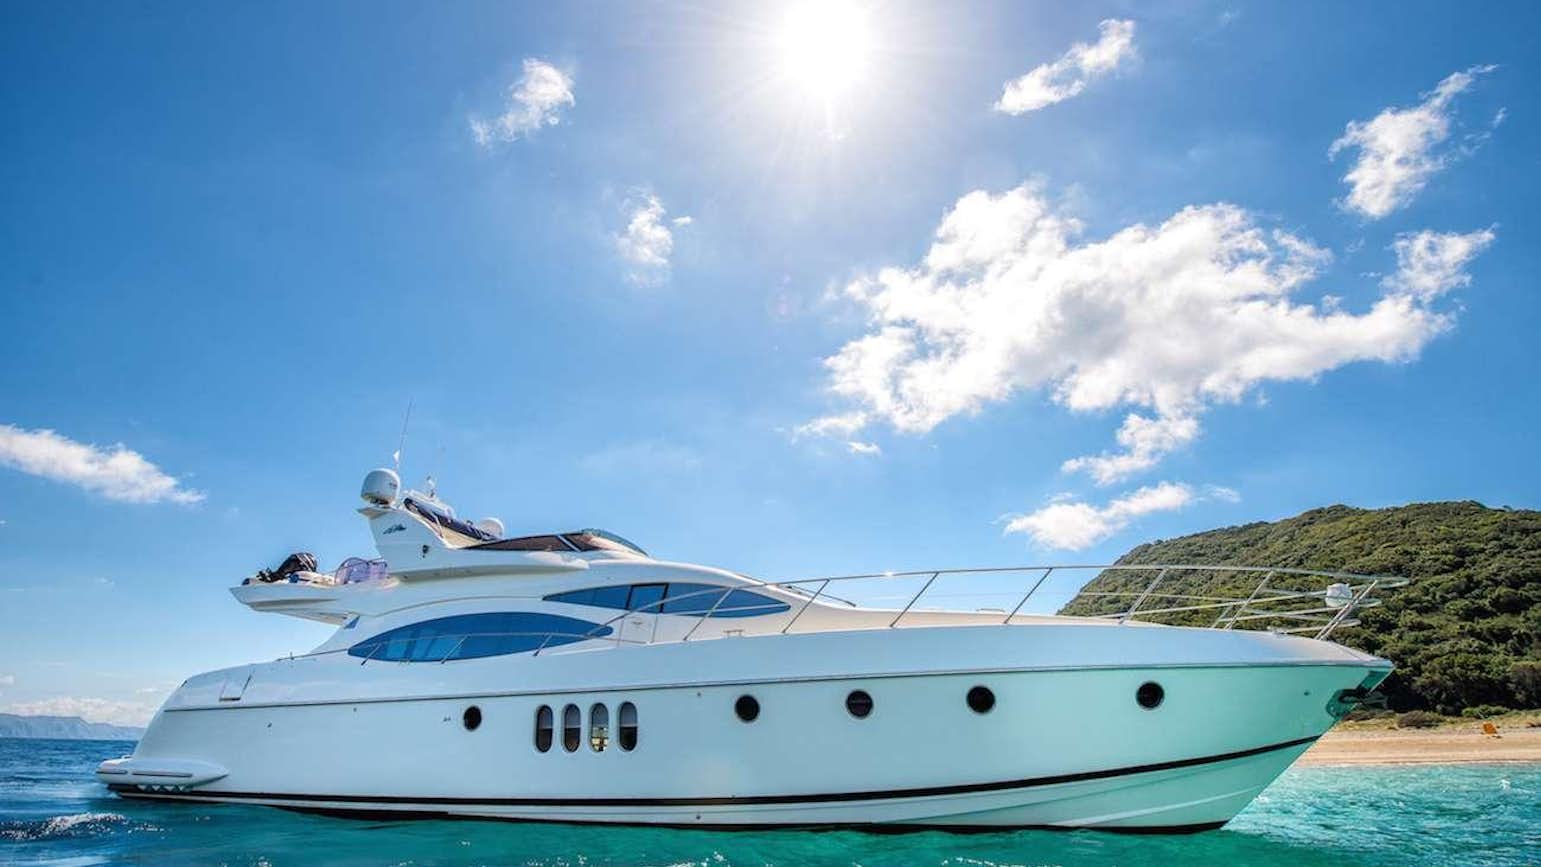 Watch Video for MANU Yacht for Charter